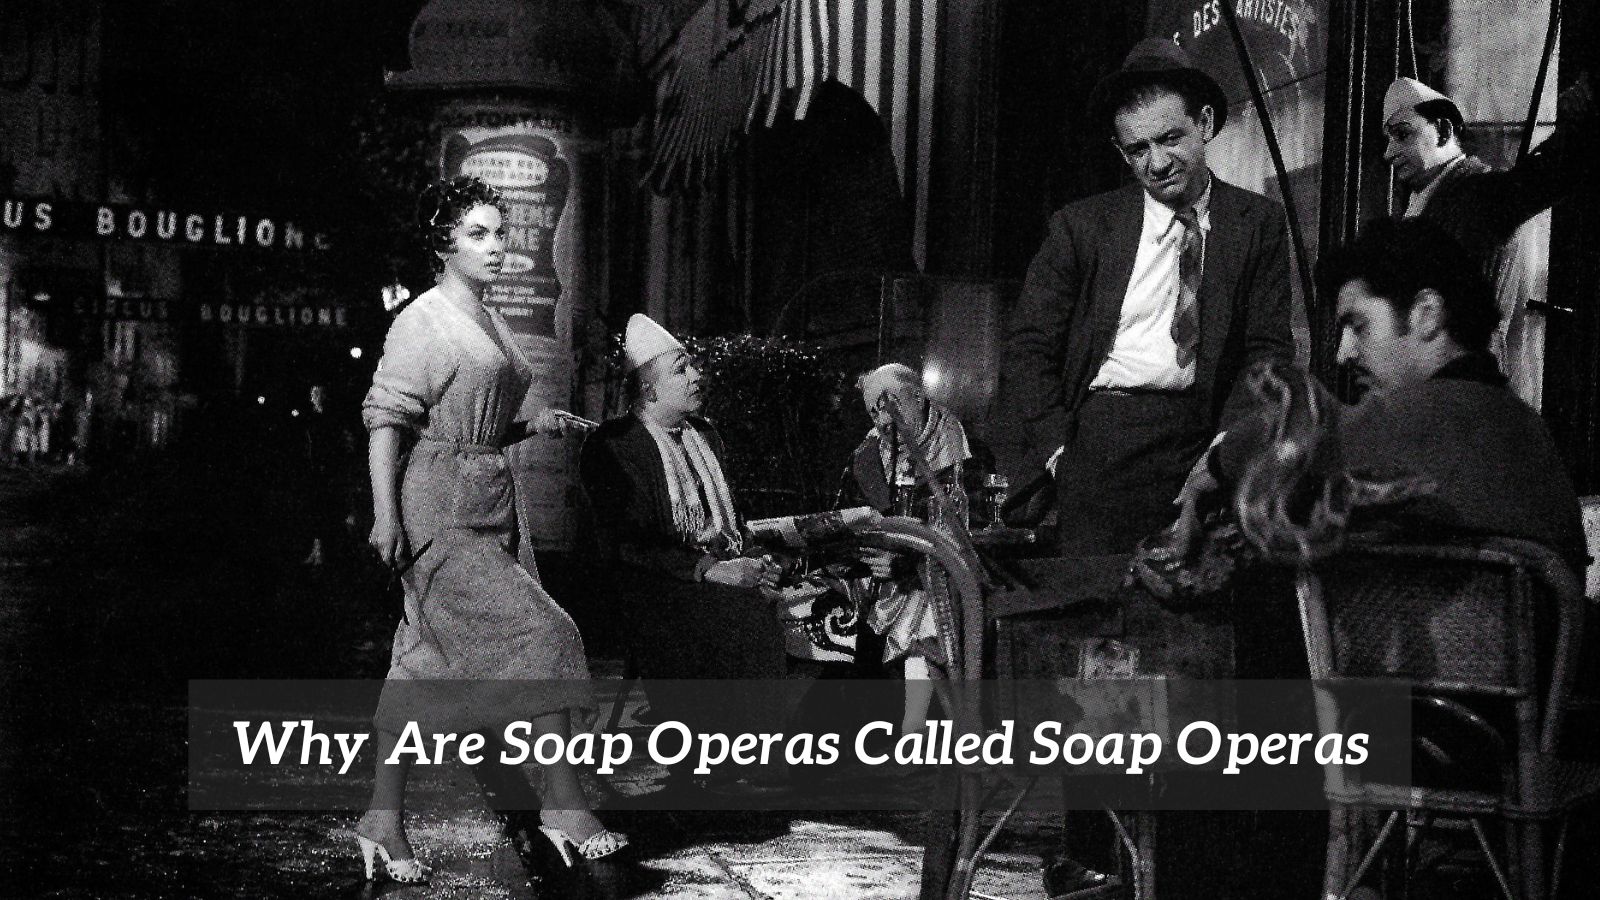 Why Are Soap Operas Called Soap Operas